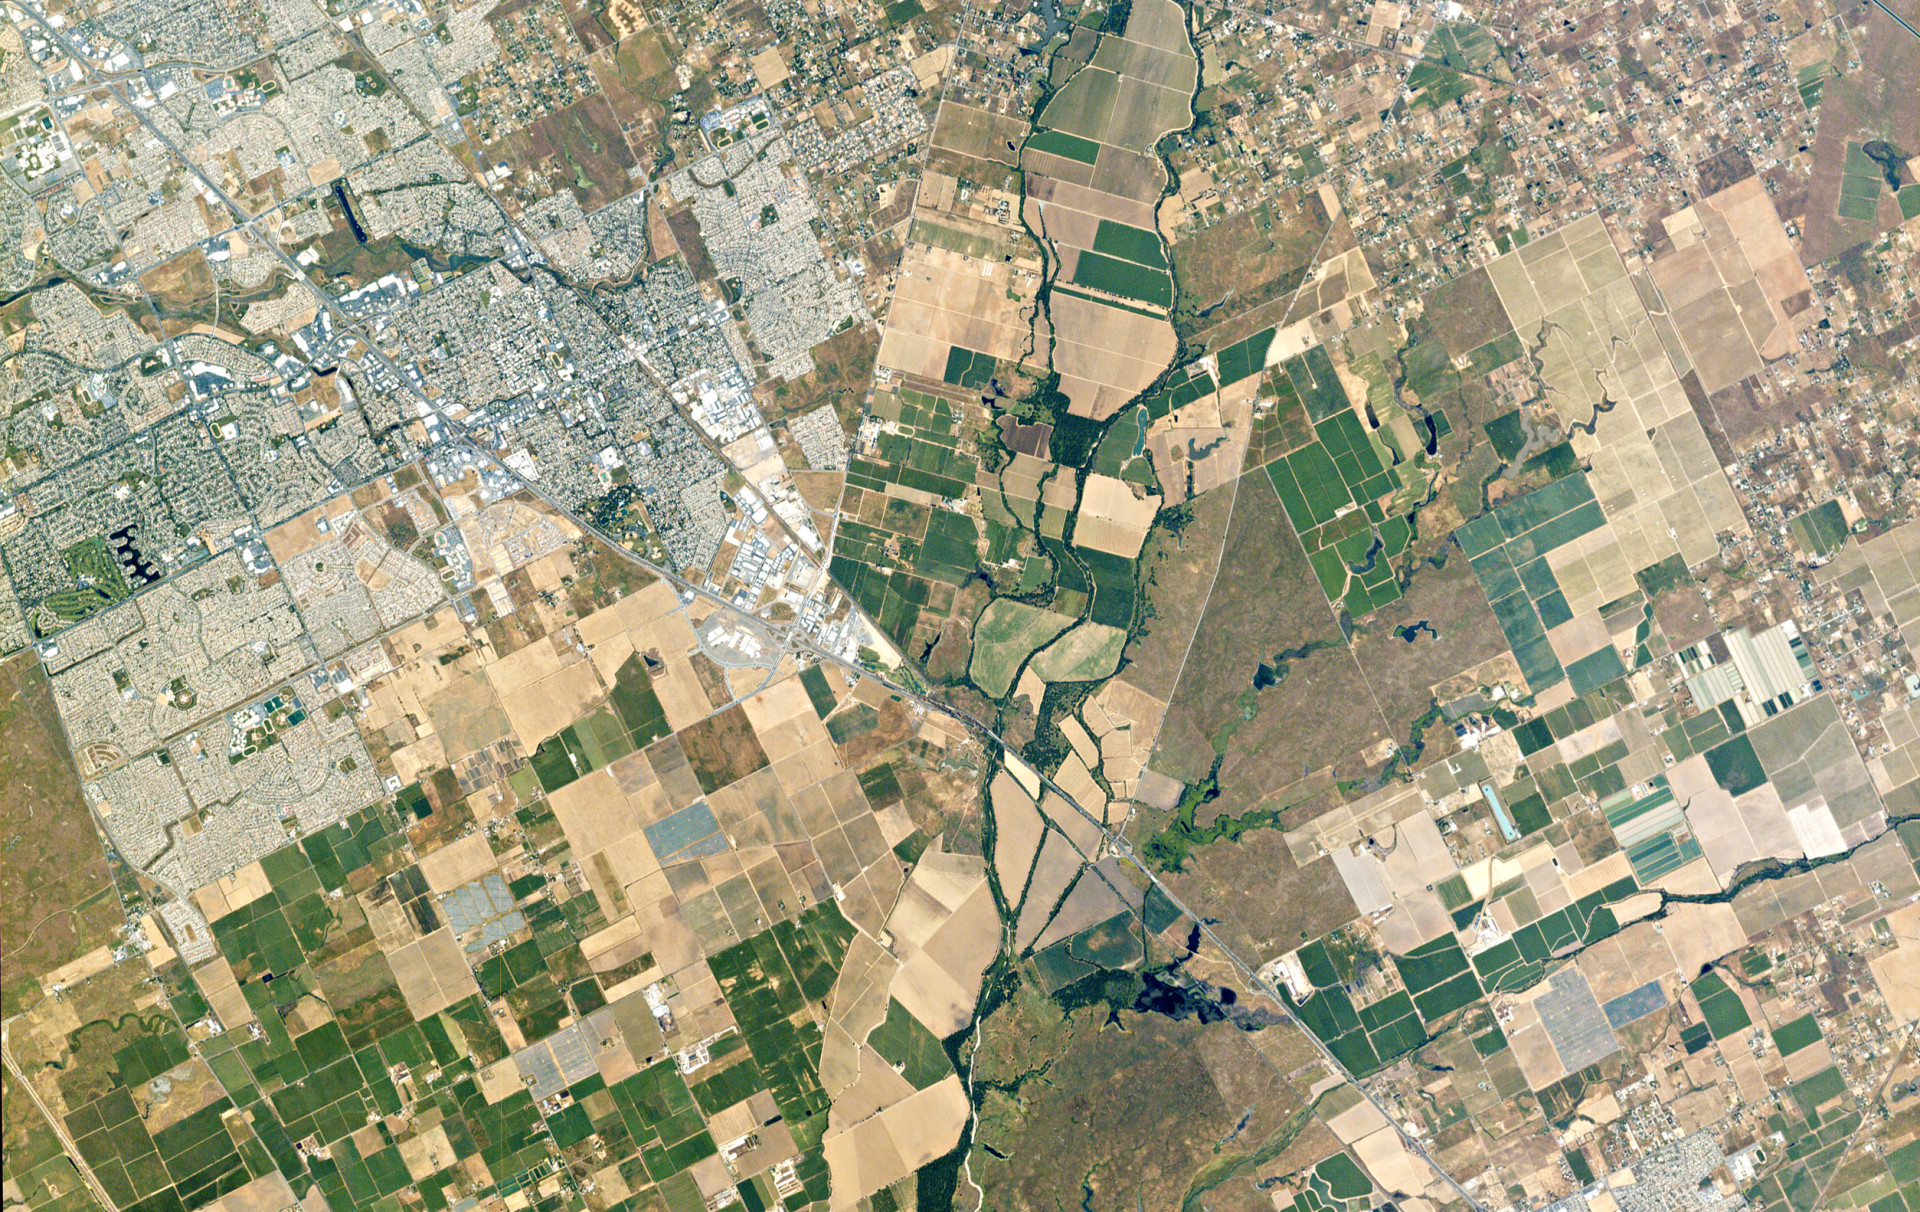 Elk Grove, Calif., is a suburb of Sacramento, about 15 miles from the city center. This 14-square mile view of the city was photographed on Apr. 23, 2015.